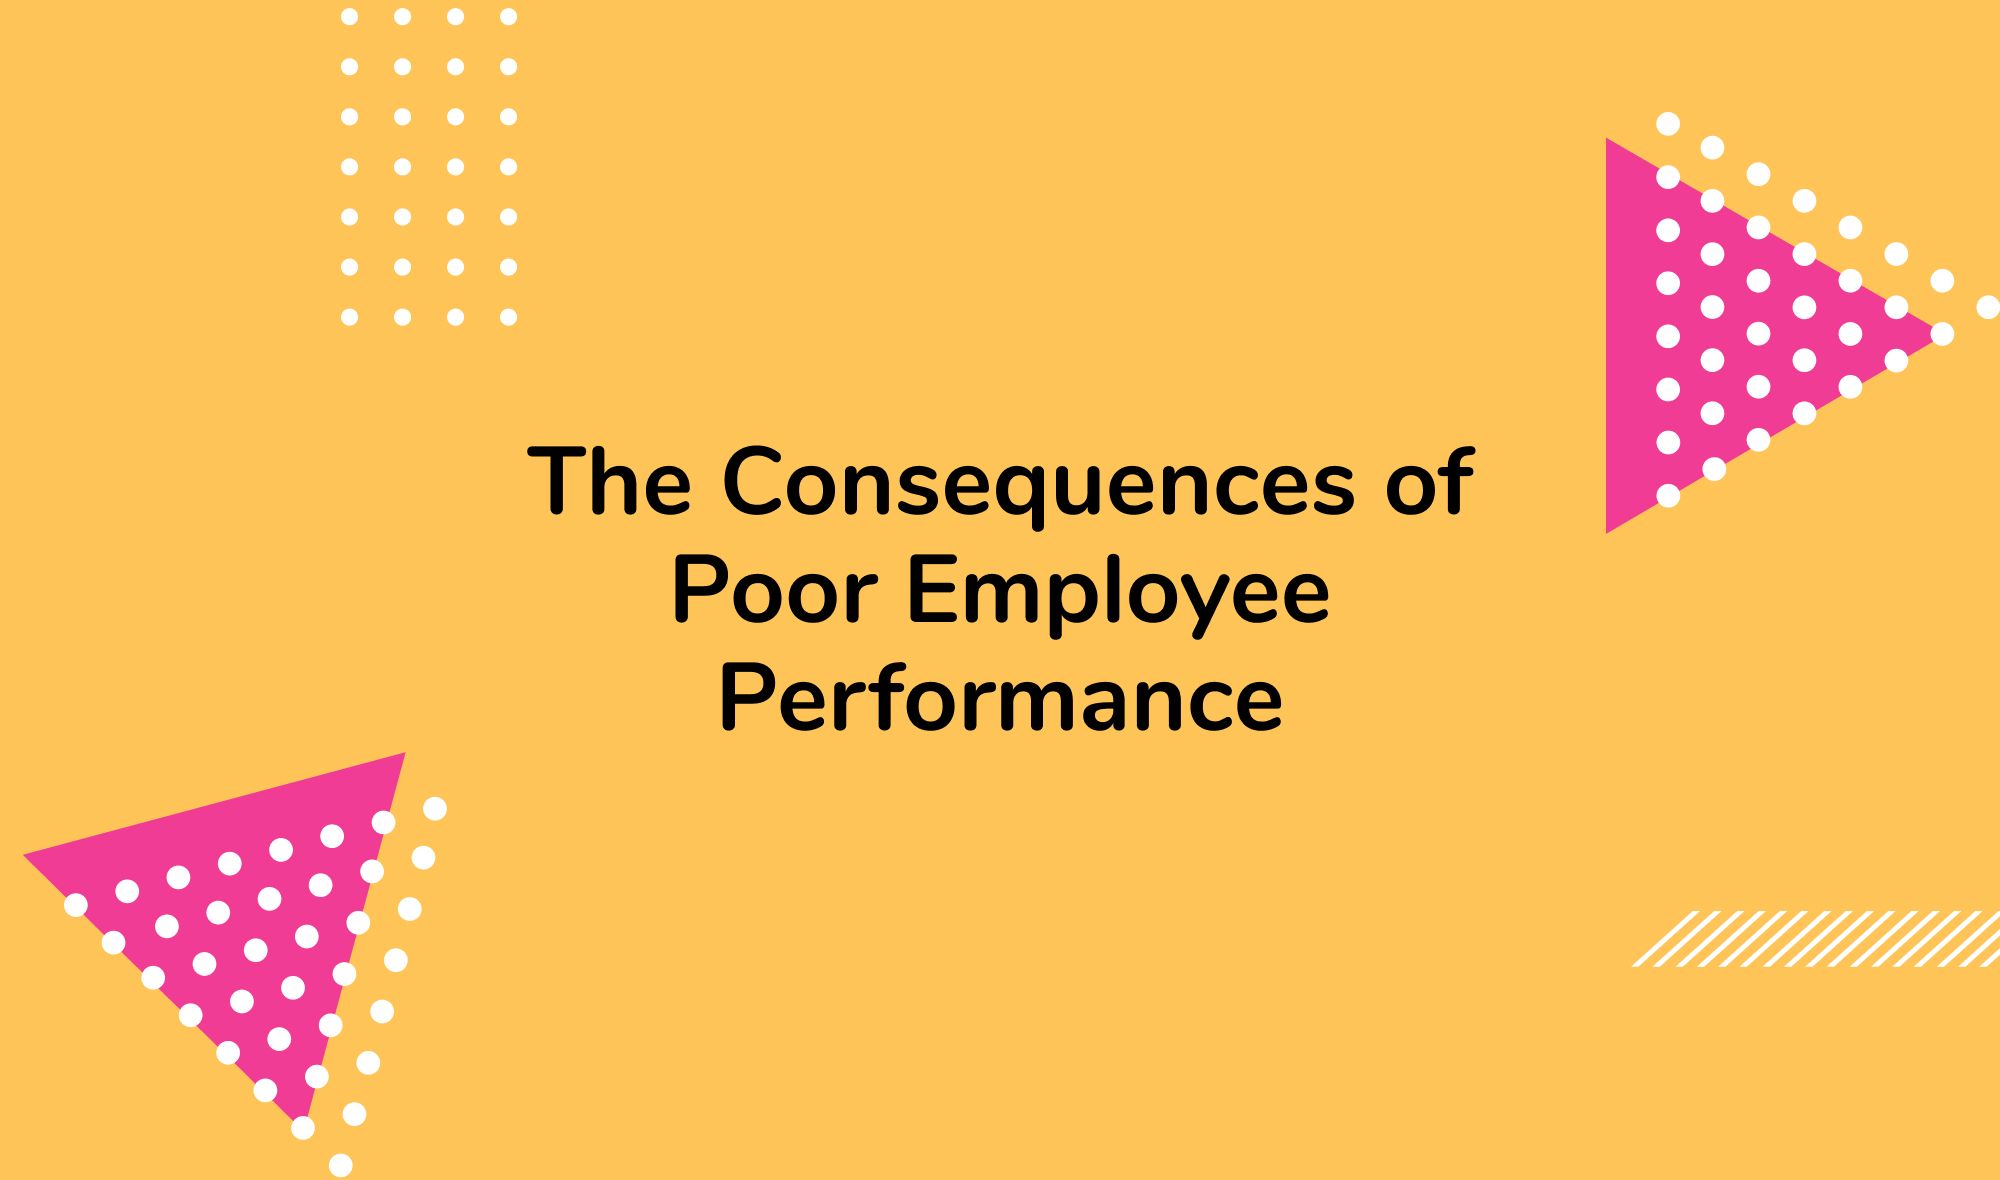 The Consequences of Poor Employee Performance